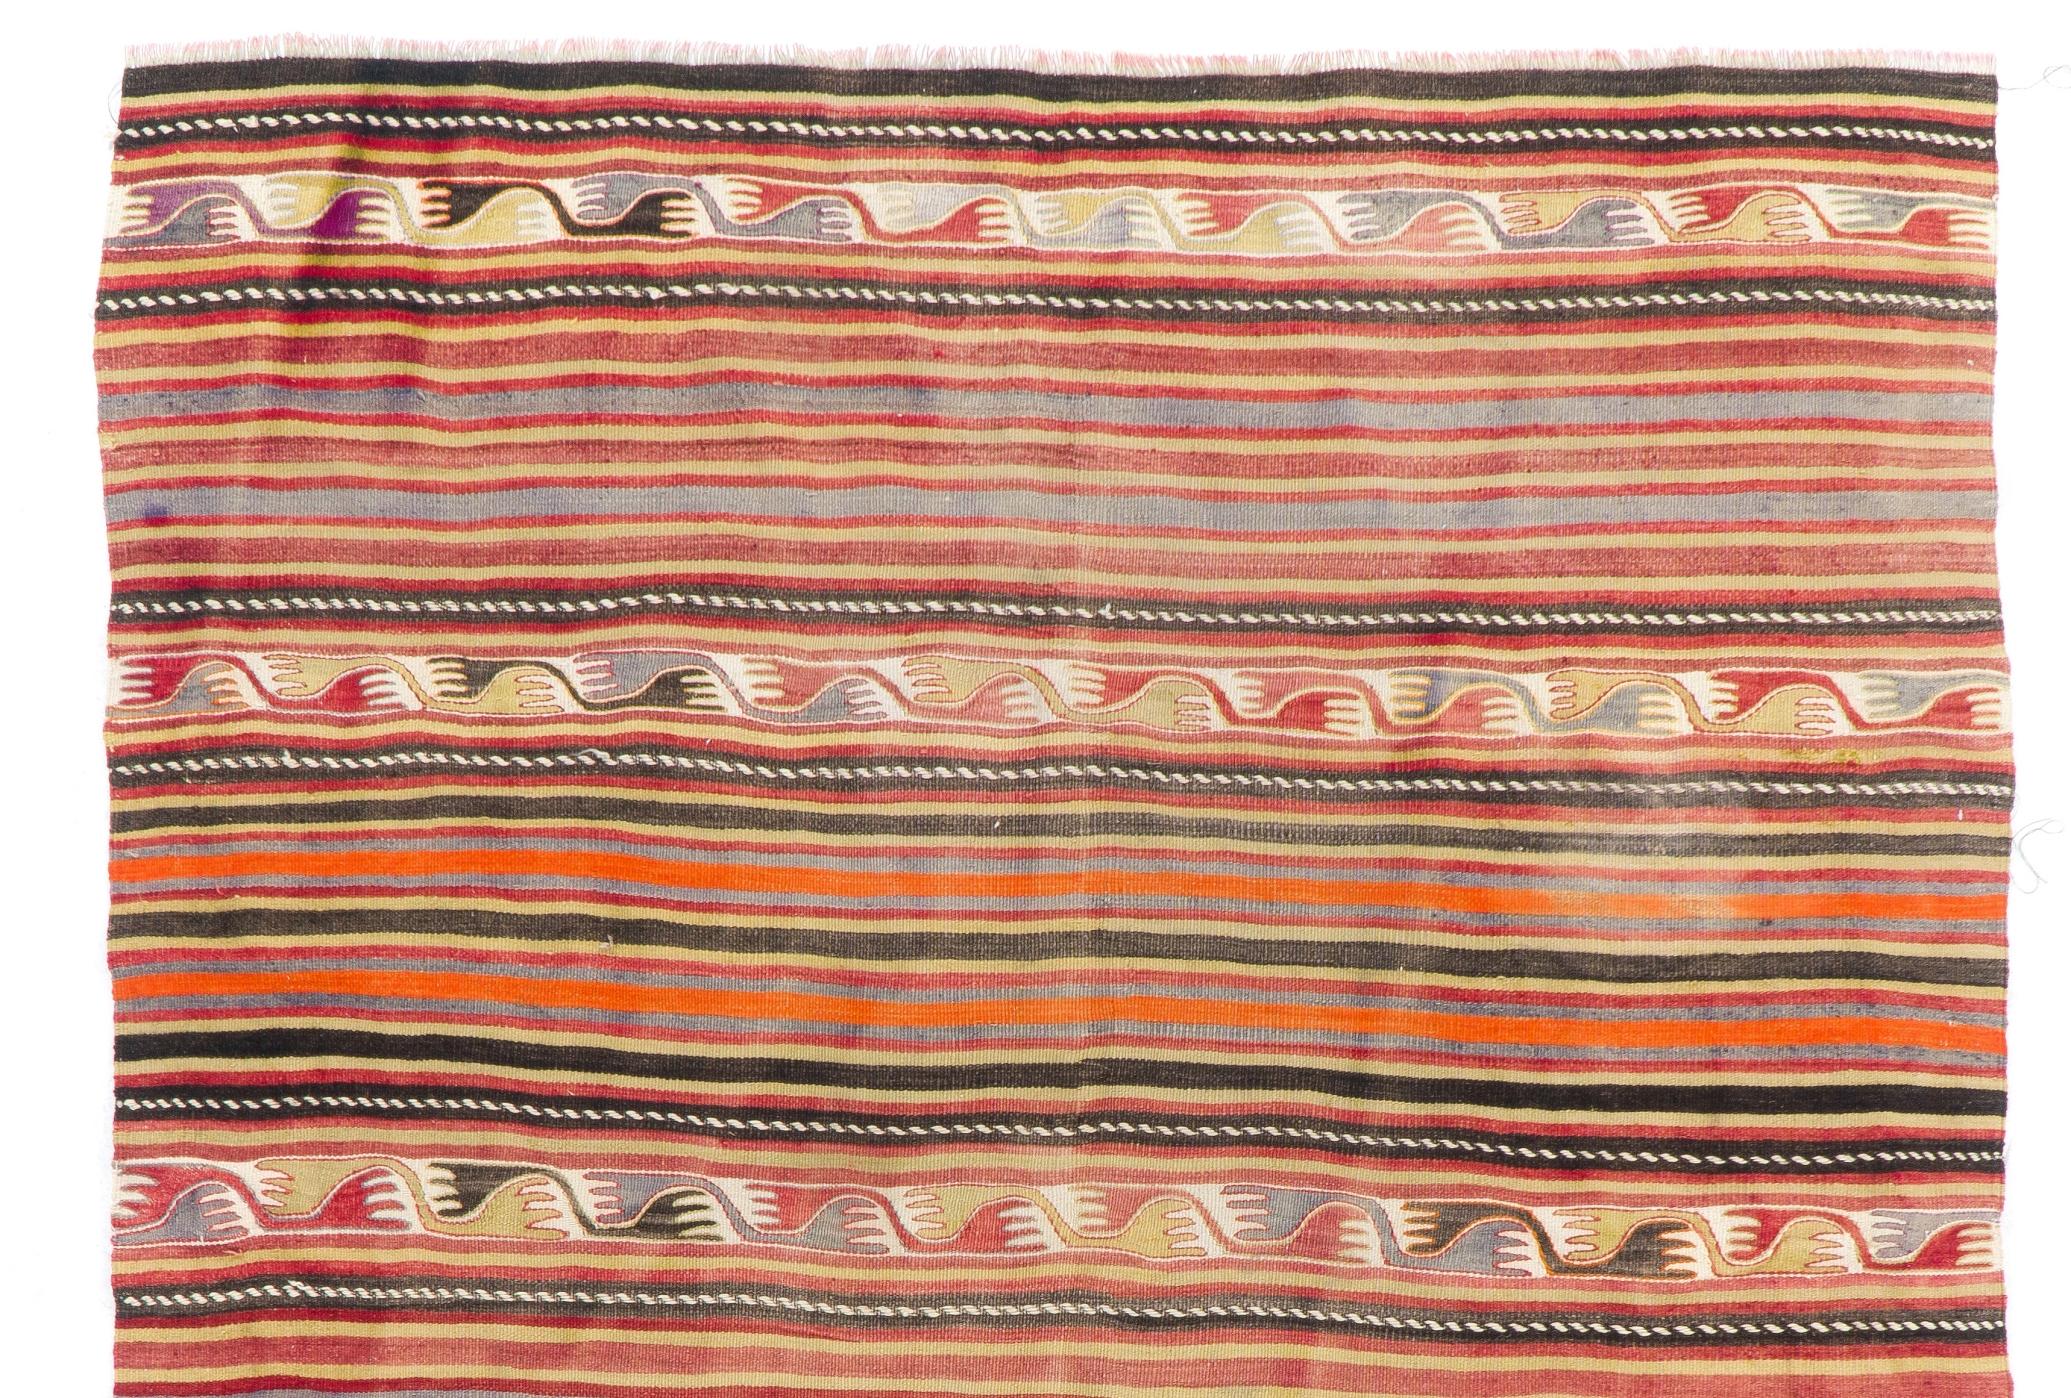 A simple yet beautiful wool rug handwoven by the nomadic tribes in South Central Turkey. 
Very good condition, sturdy and clean. 
We can modify the dimensions if requested, ie. make it shorter and/or narrower. 
Reversible; both sides can be used.